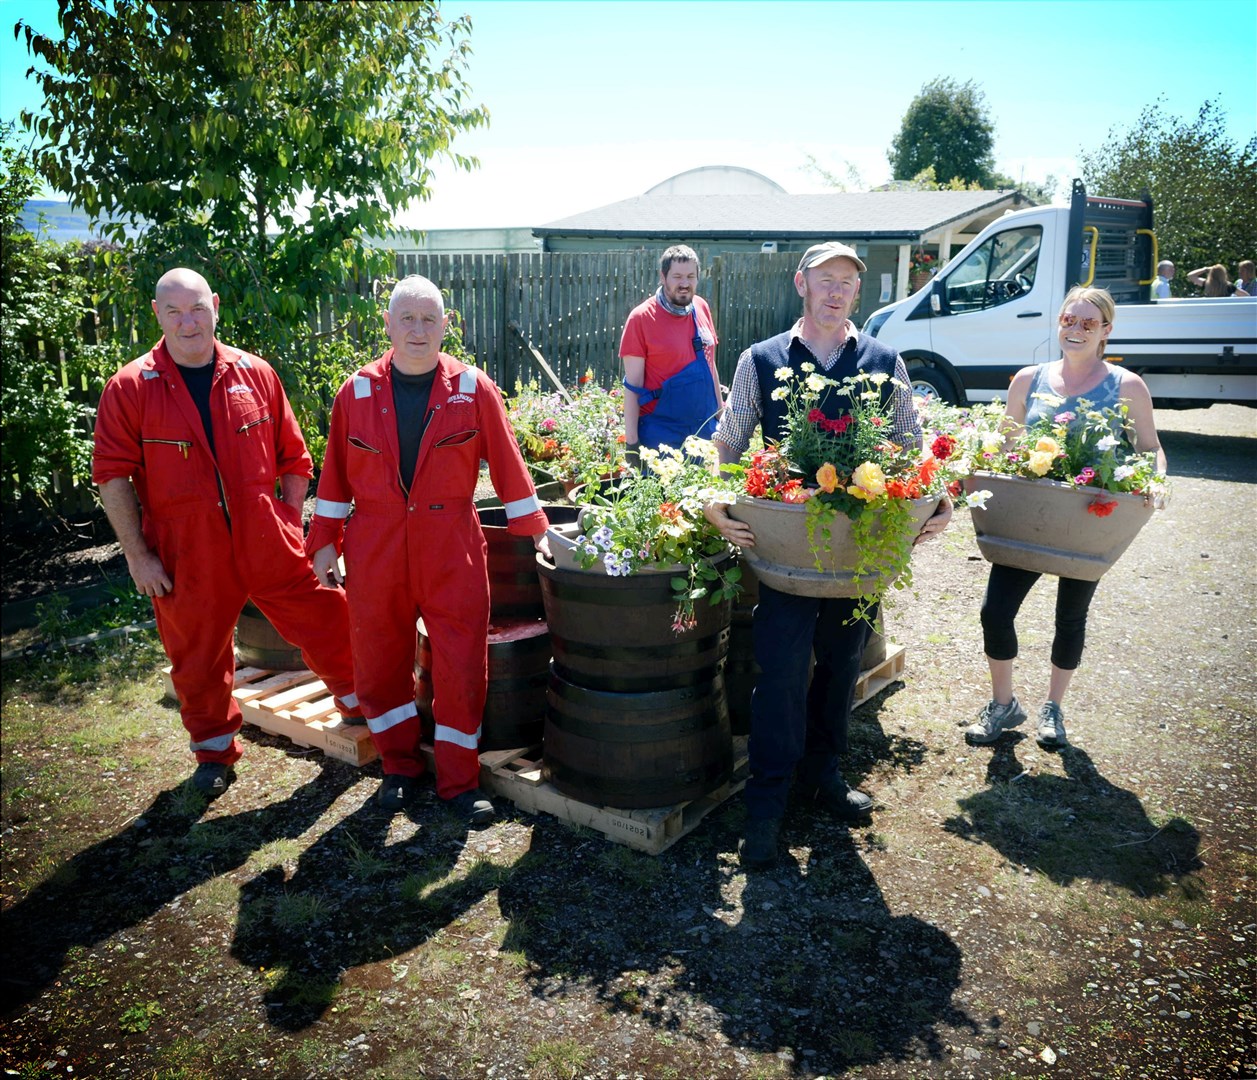 Invergordon Distillery mark their 60th anniversary with planted up barrels: Hugh Smee and Morris Bremner from Invergordon Distillery dropping off barrels for Alastair Herd, Terry Hines and Vicki Calder from Blooming Gardeners to fill with flowers. Picture: James Mackenzie